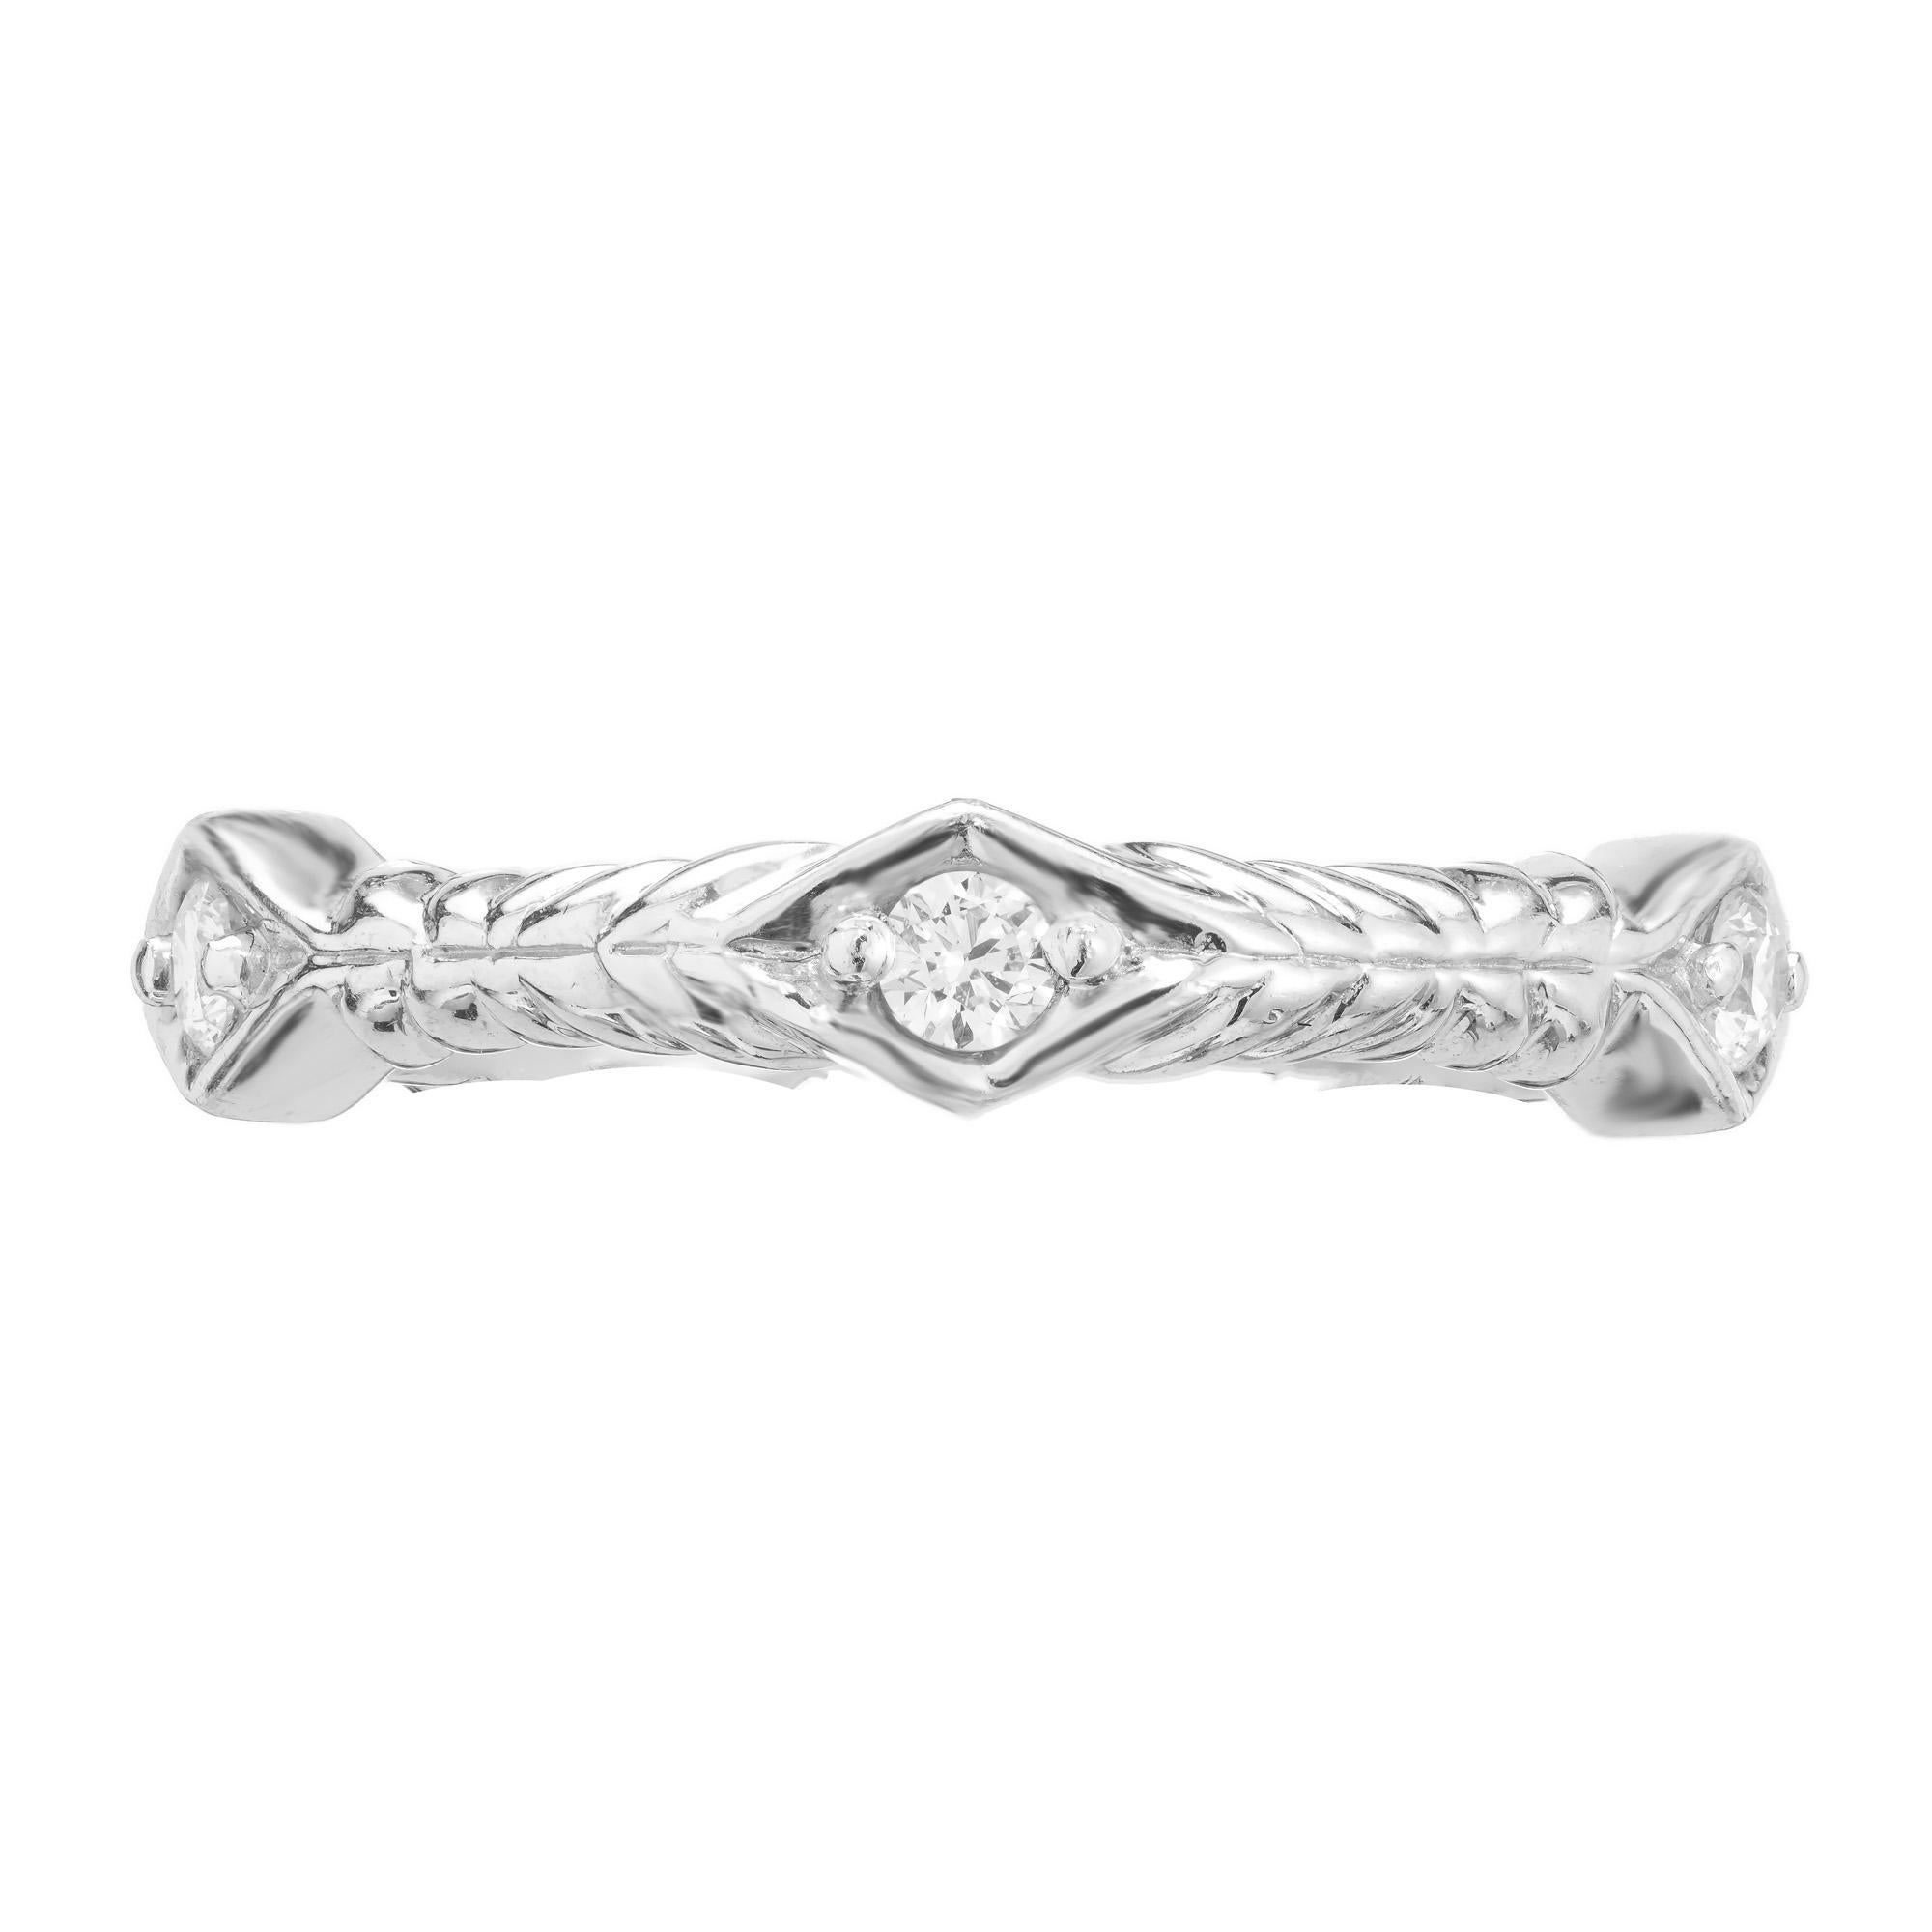 Alternative eternity diamond wedding band ring. 5 round brilliant cut diamonds set in a solid platinum setting. The diamonds are set in marquise shaped sections separated by grooved sections. This ring is not size able but can be custom ordered in